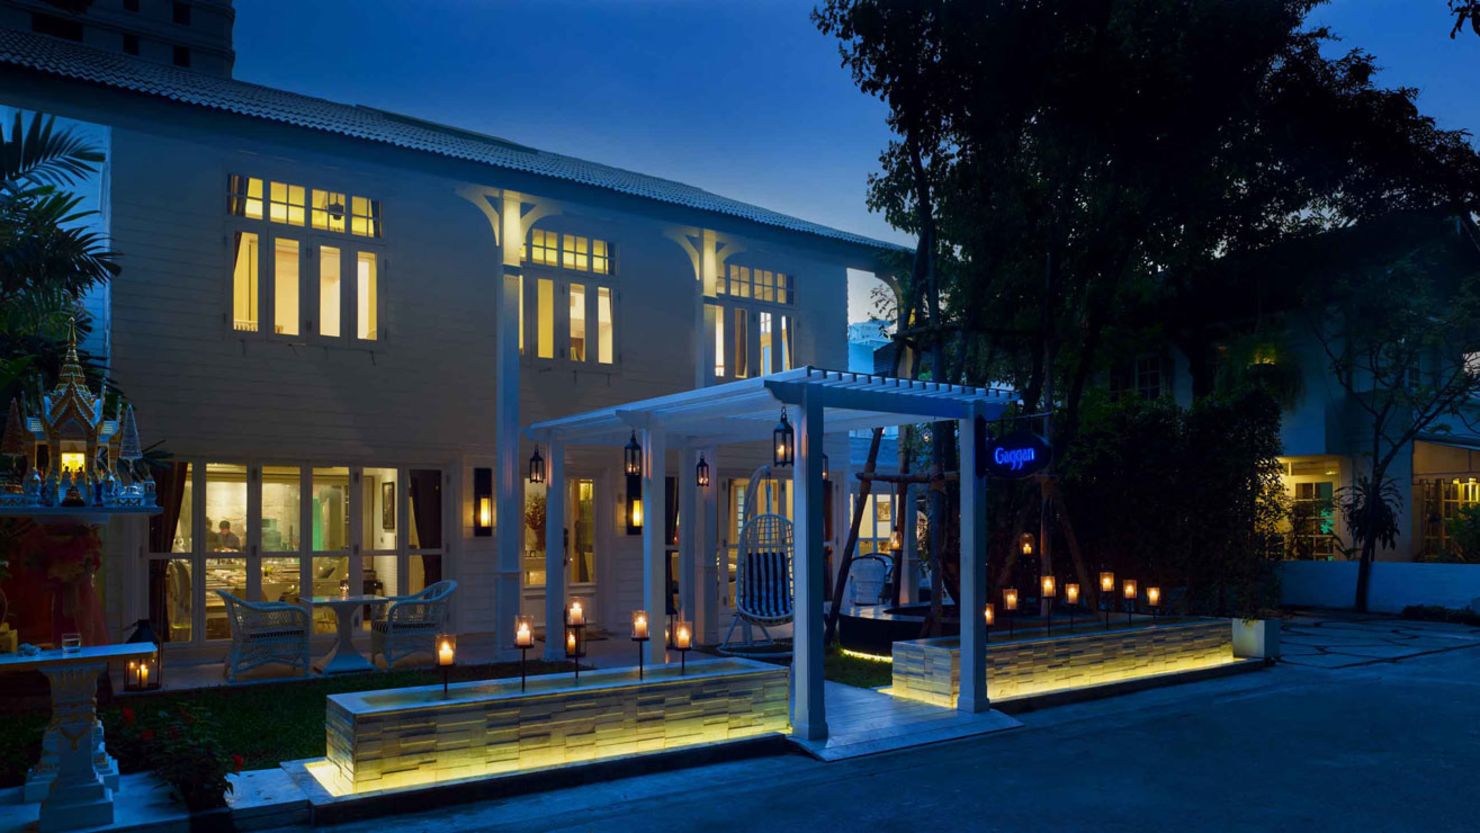 Set in a restored white wooden house, nothing about Gaggan's restaurant looks like a typical Indian restaurant. Fitting, as there's nothing typical about this place. 